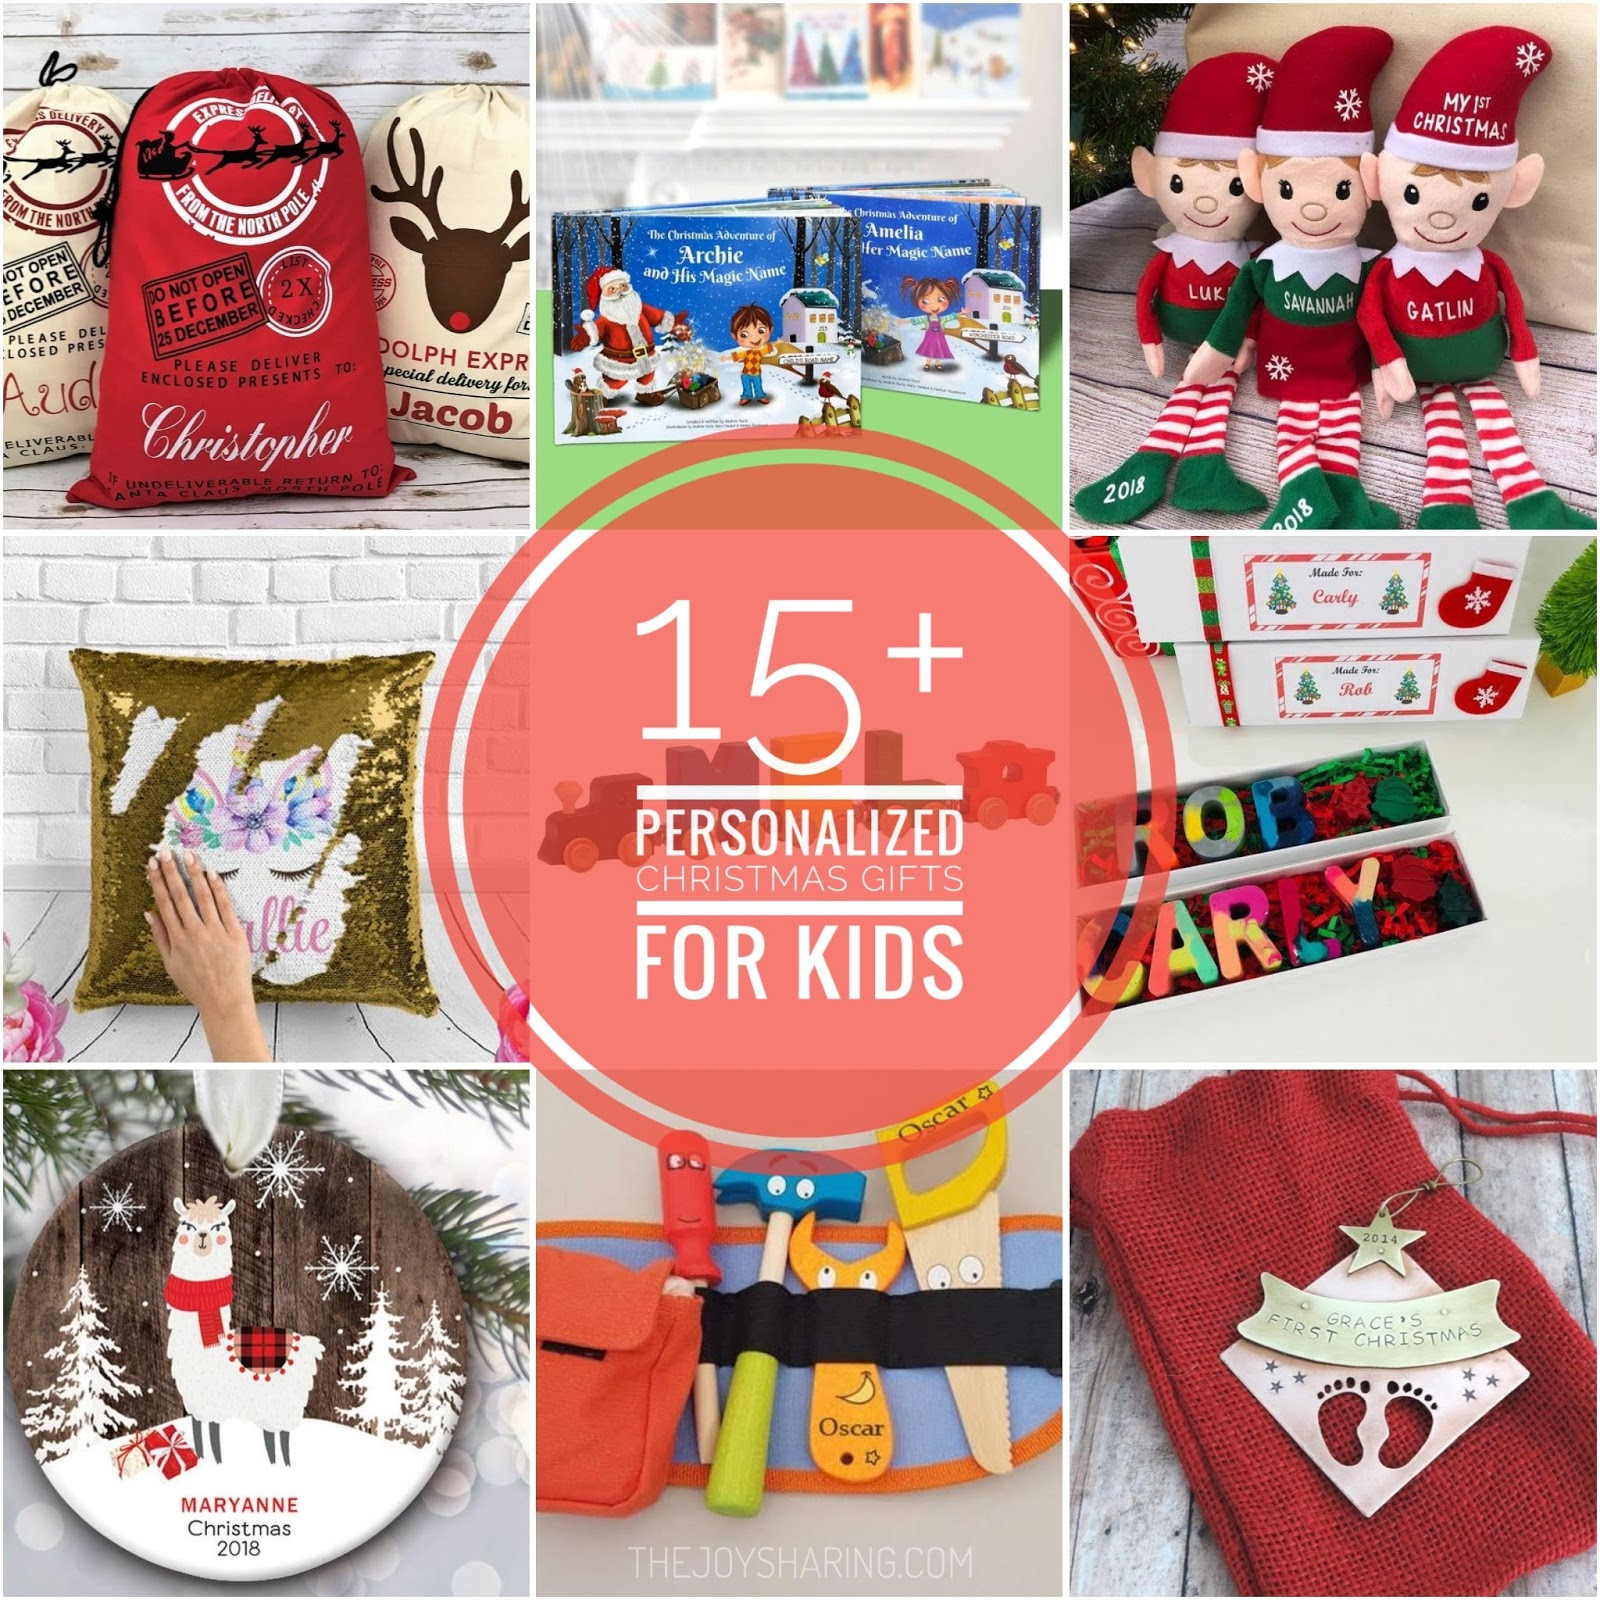 Unique Christmas Gifts For Kids
 15 Personalized Christmas Gifts for Kids The Joy of Sharing